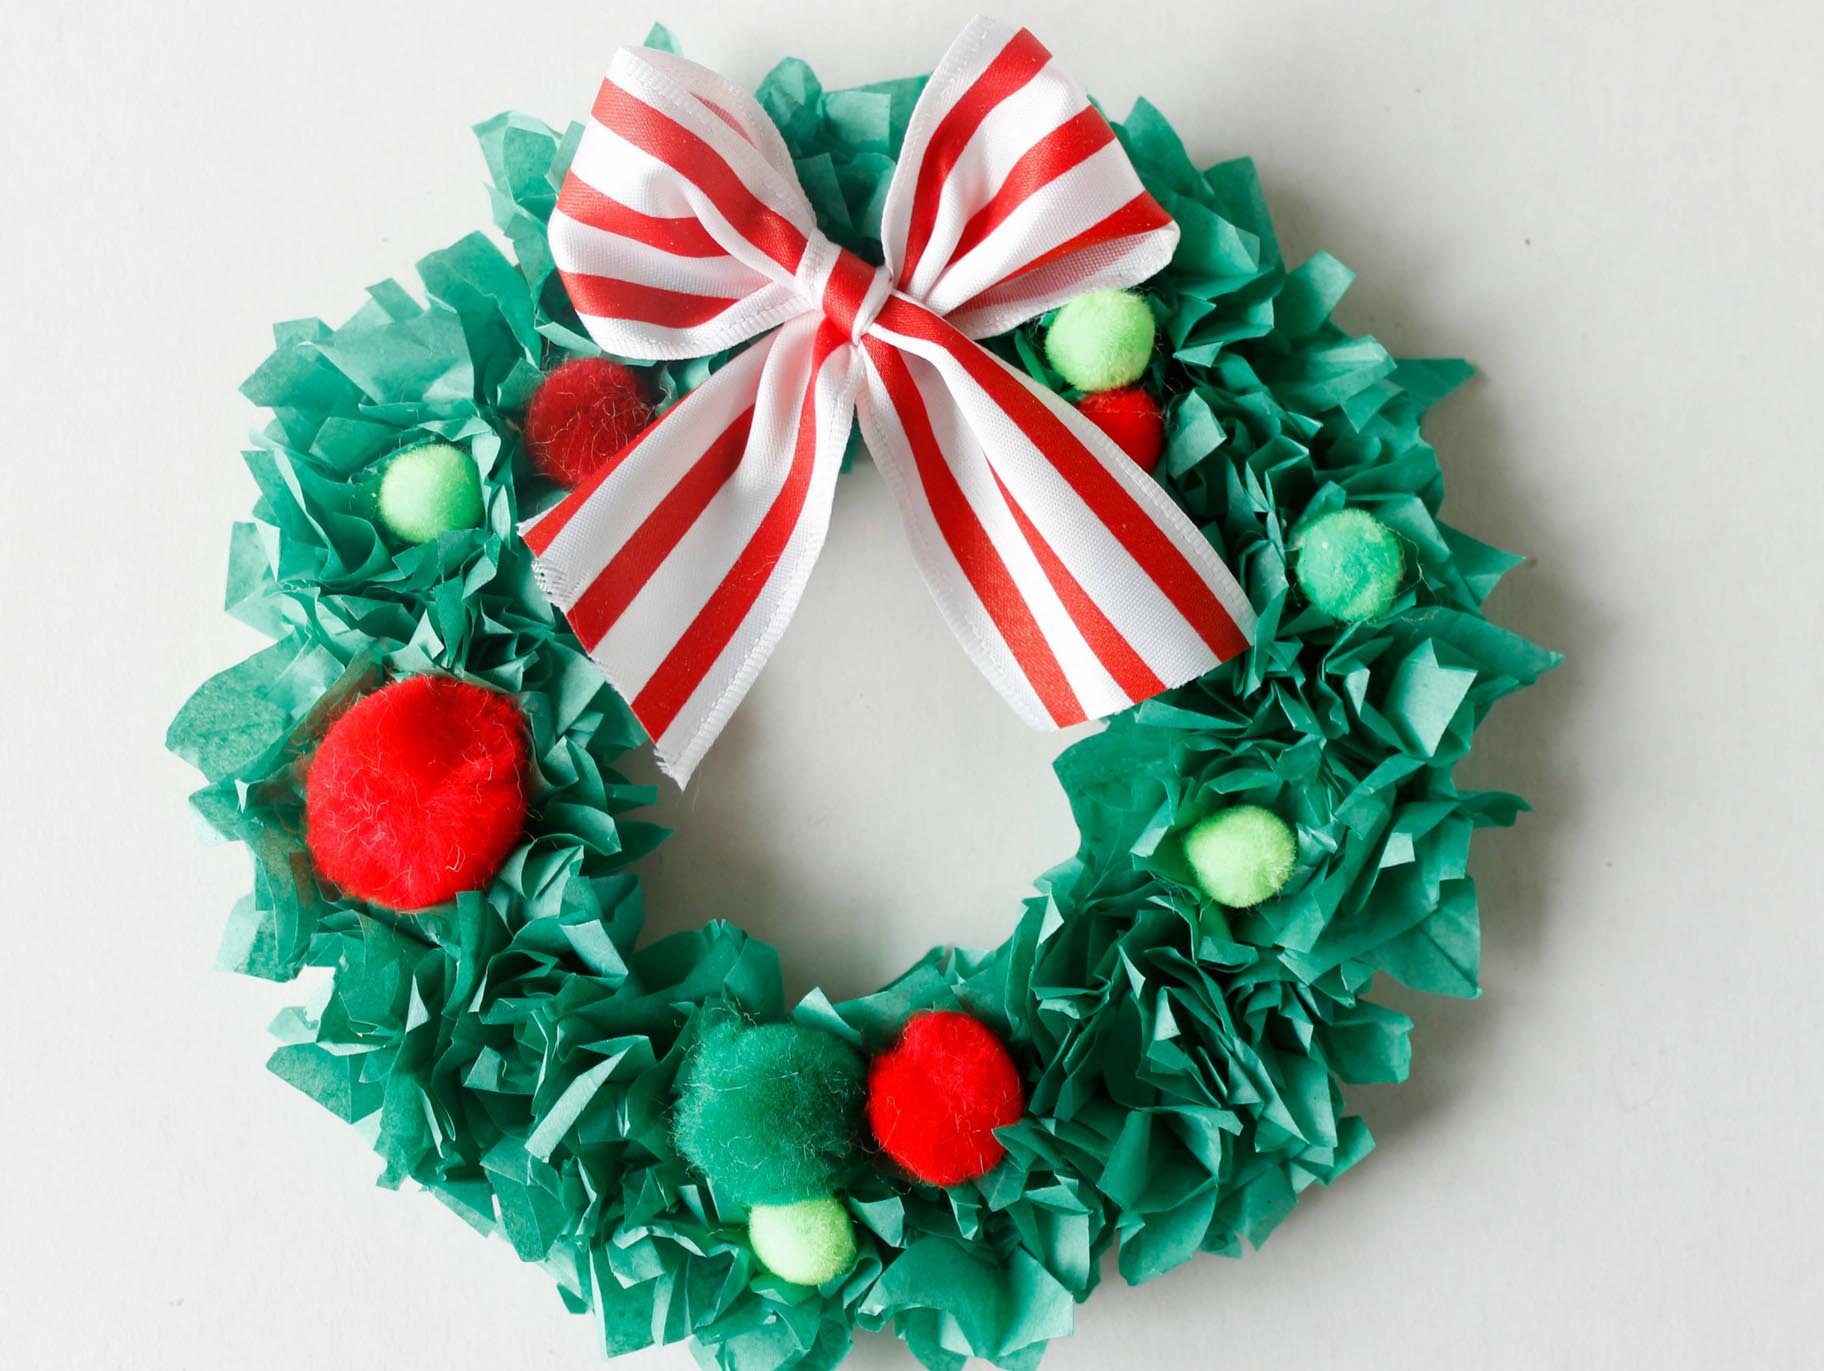 Tissue Paper Wreath Craft - Toddler at Play